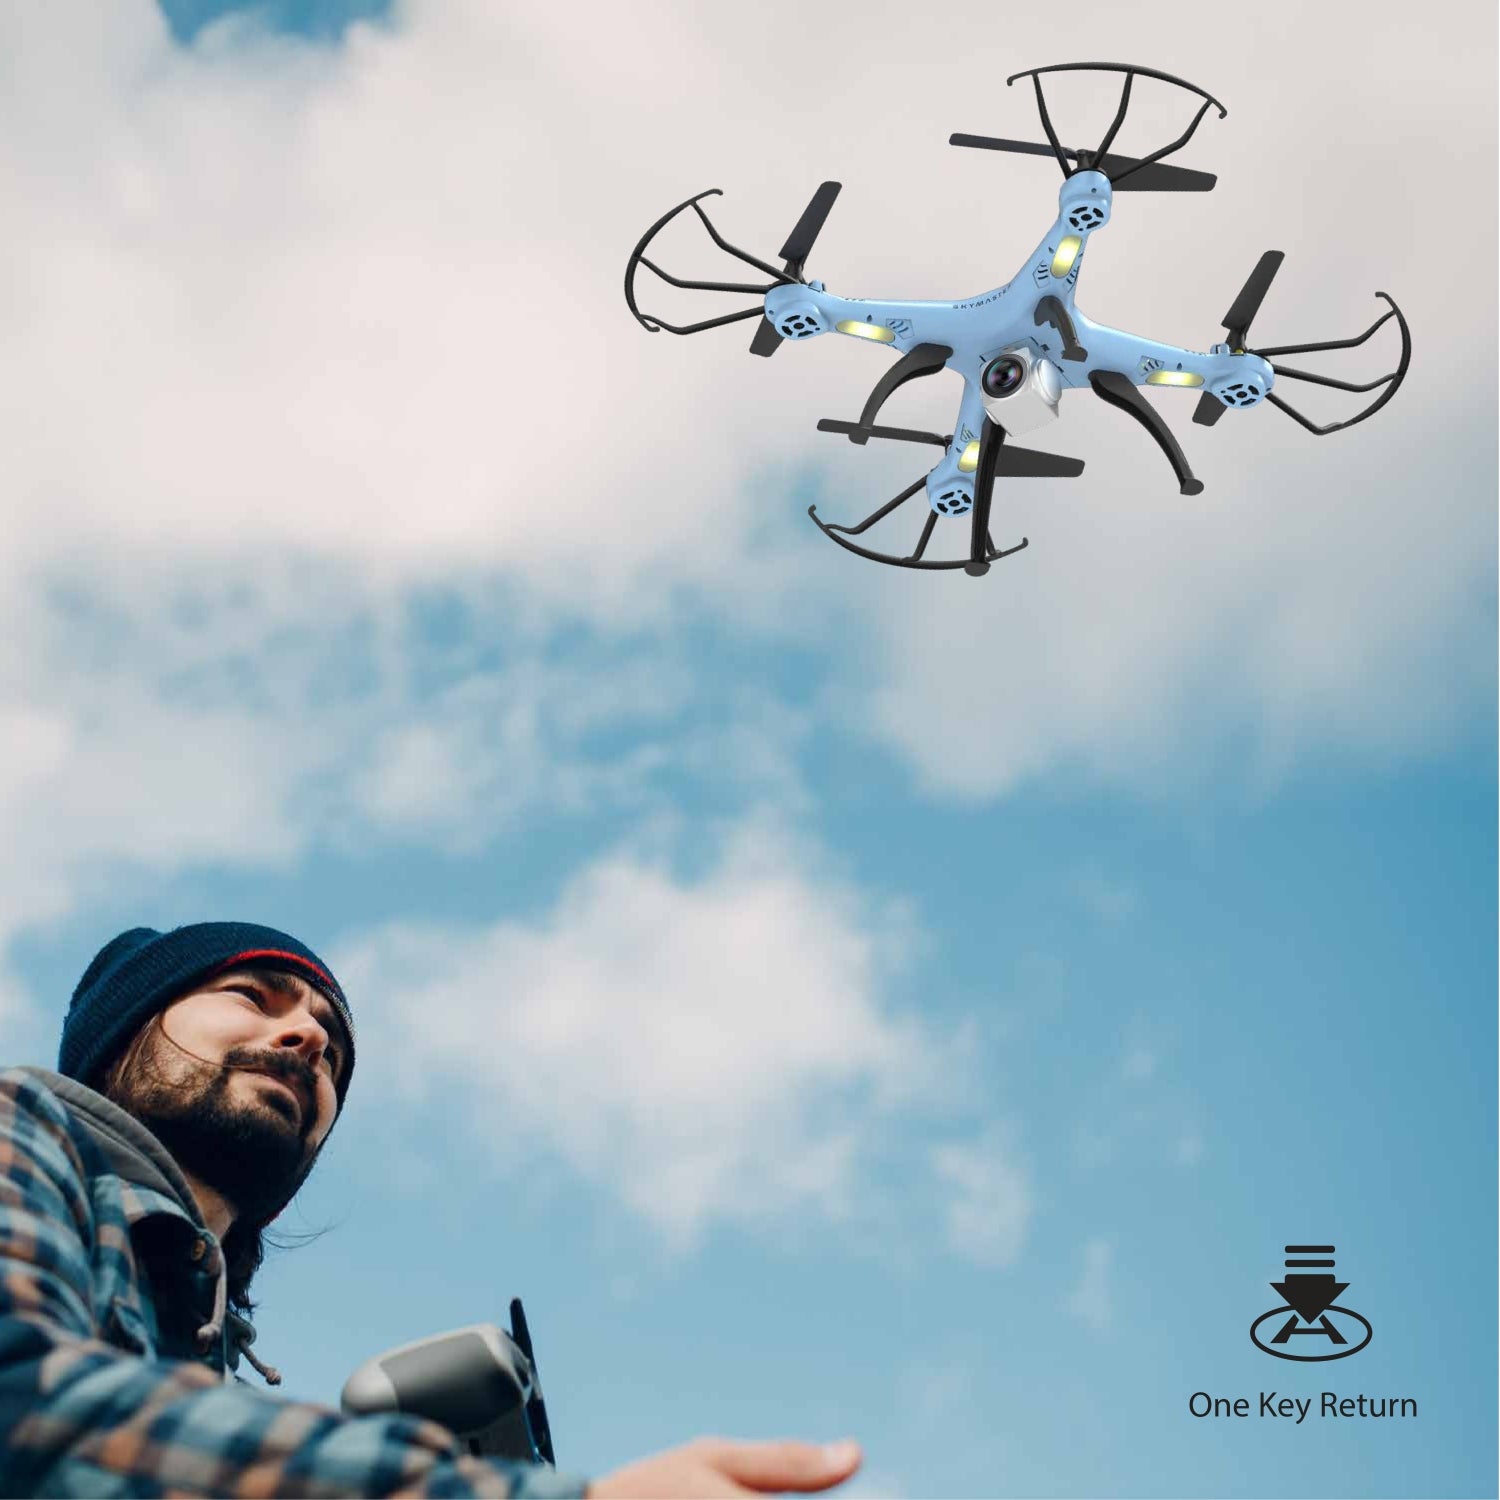 outdoor drone with one key take off feature and one key return feature